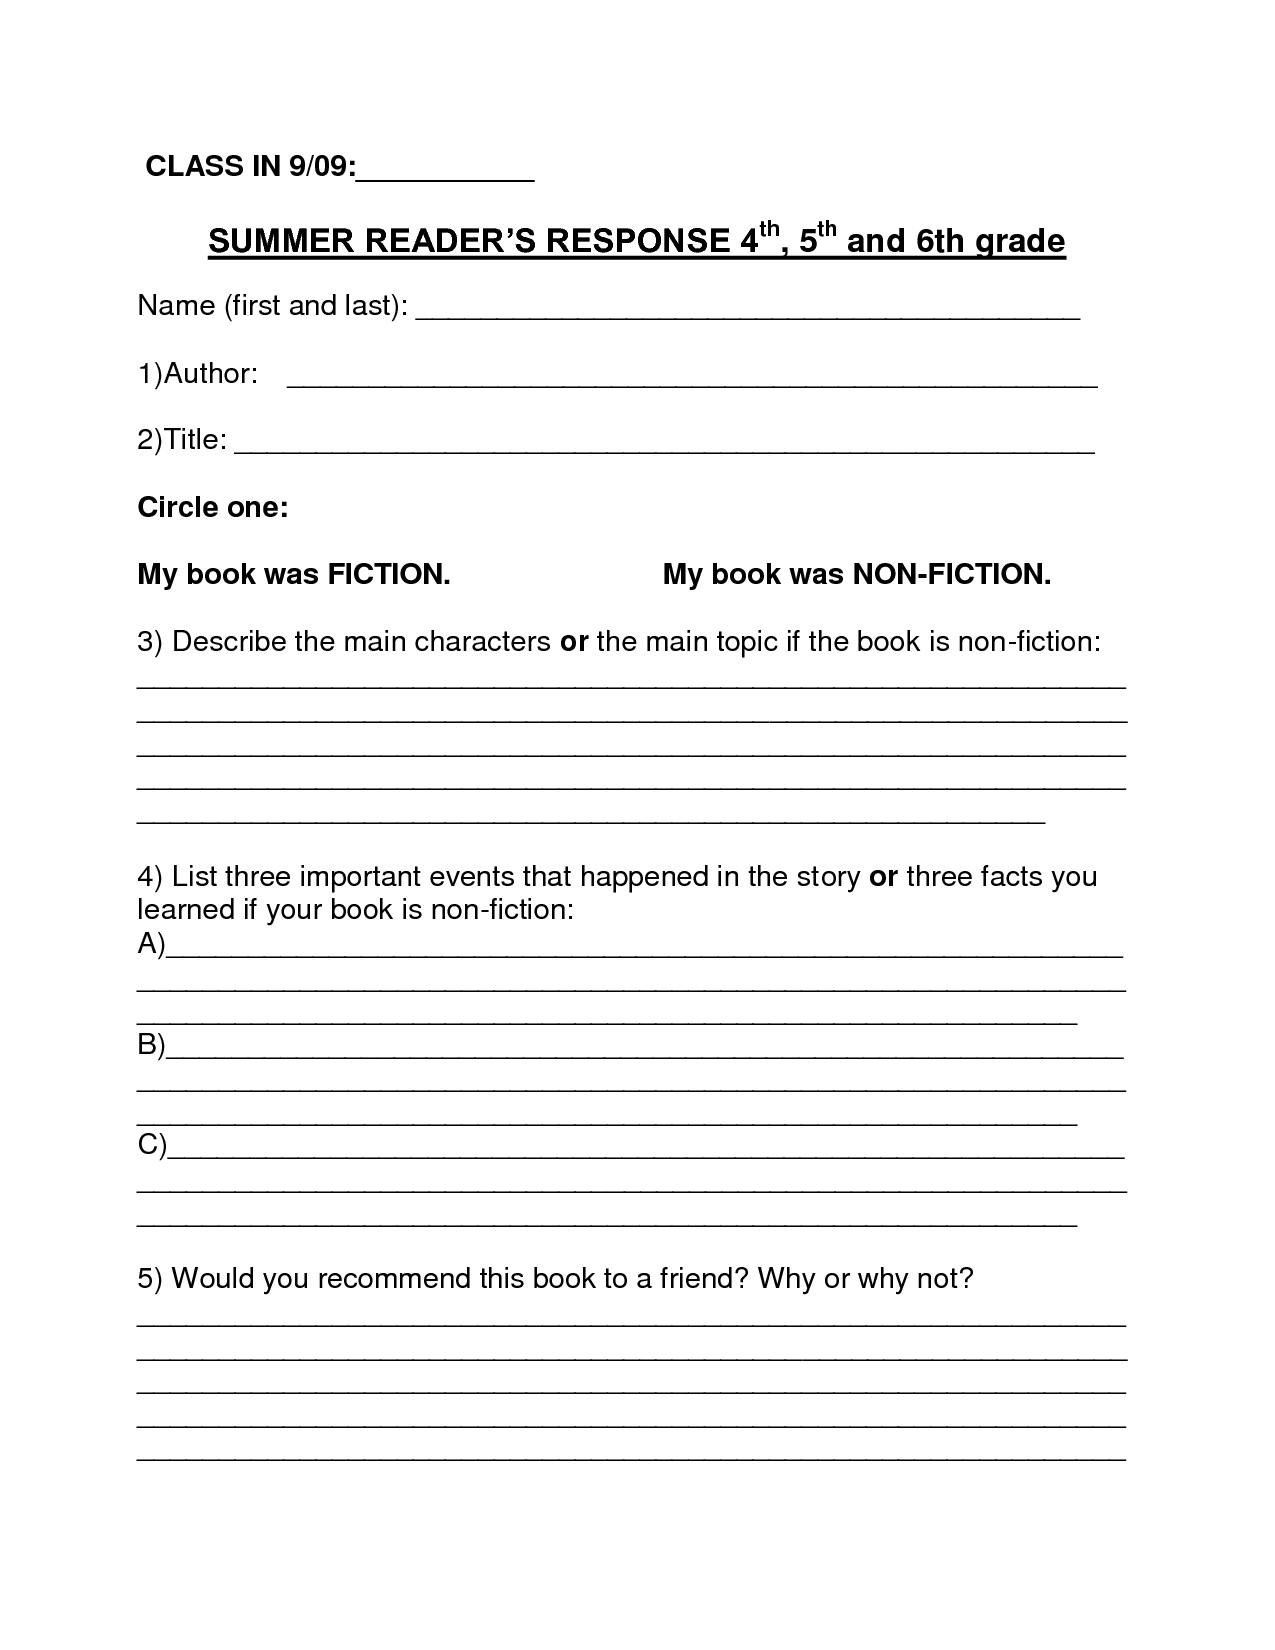 Image Result For Book Report Summer Reading Form 6Th Grade | Middle - Free Printable Book Report Forms For Second Grade